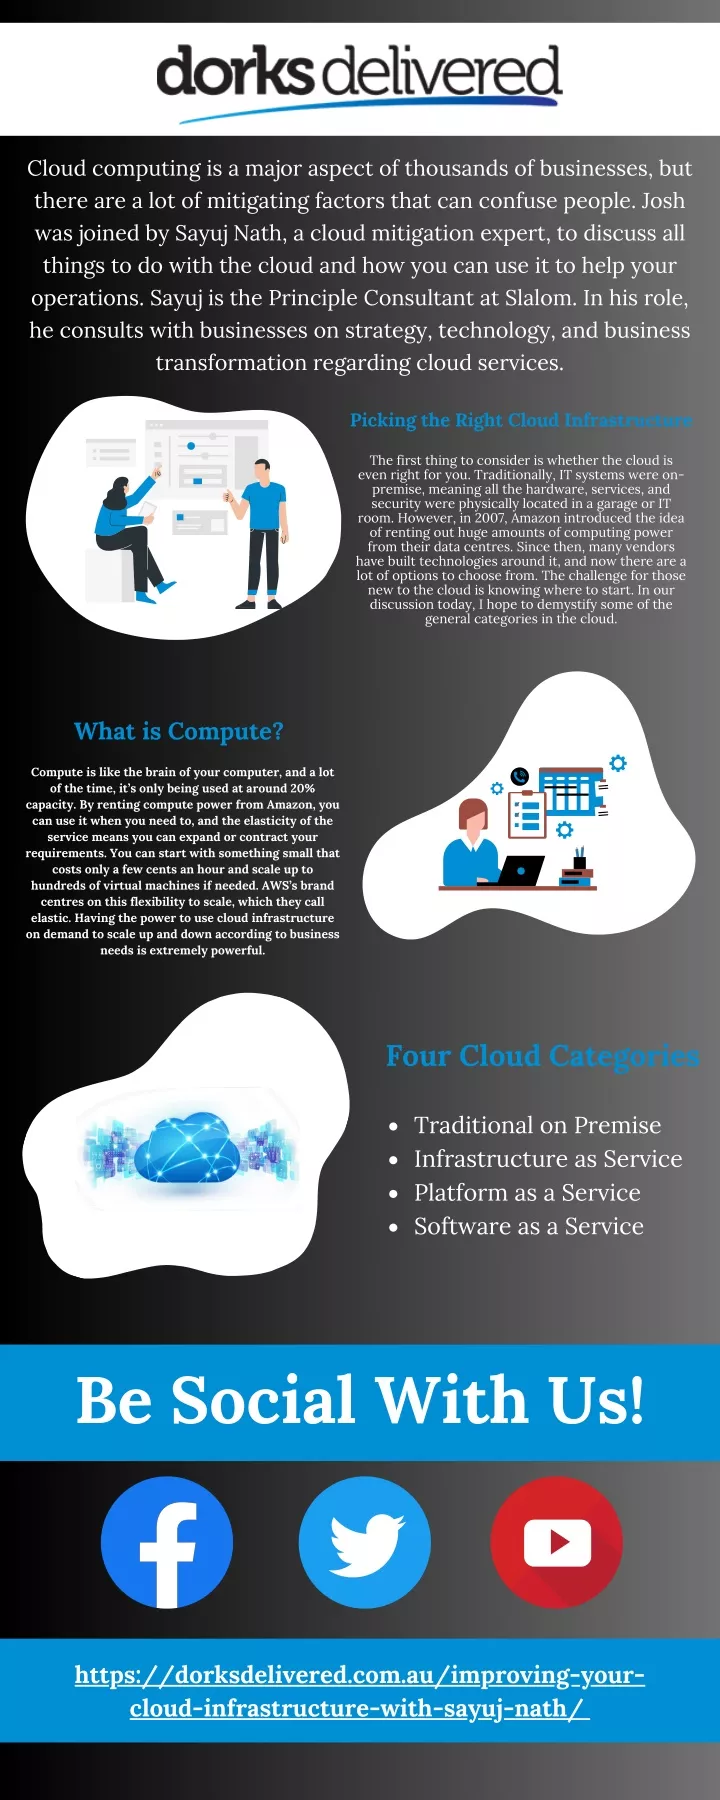 cloud computing is a major aspect of thousands